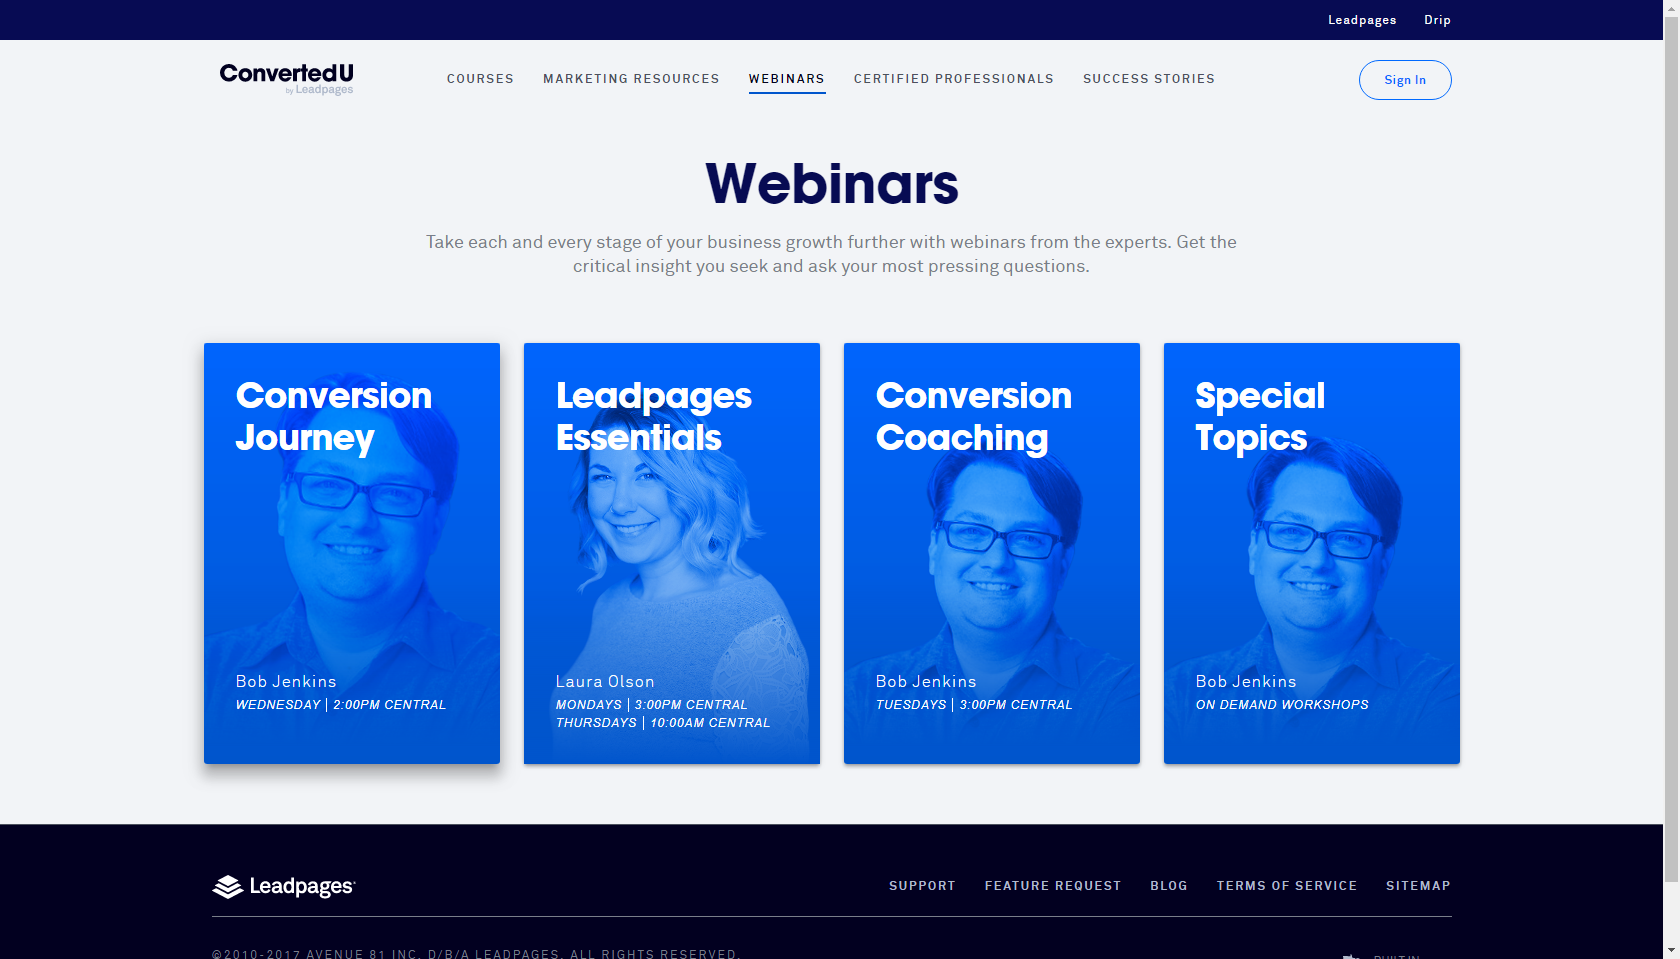 Leadpages guides 